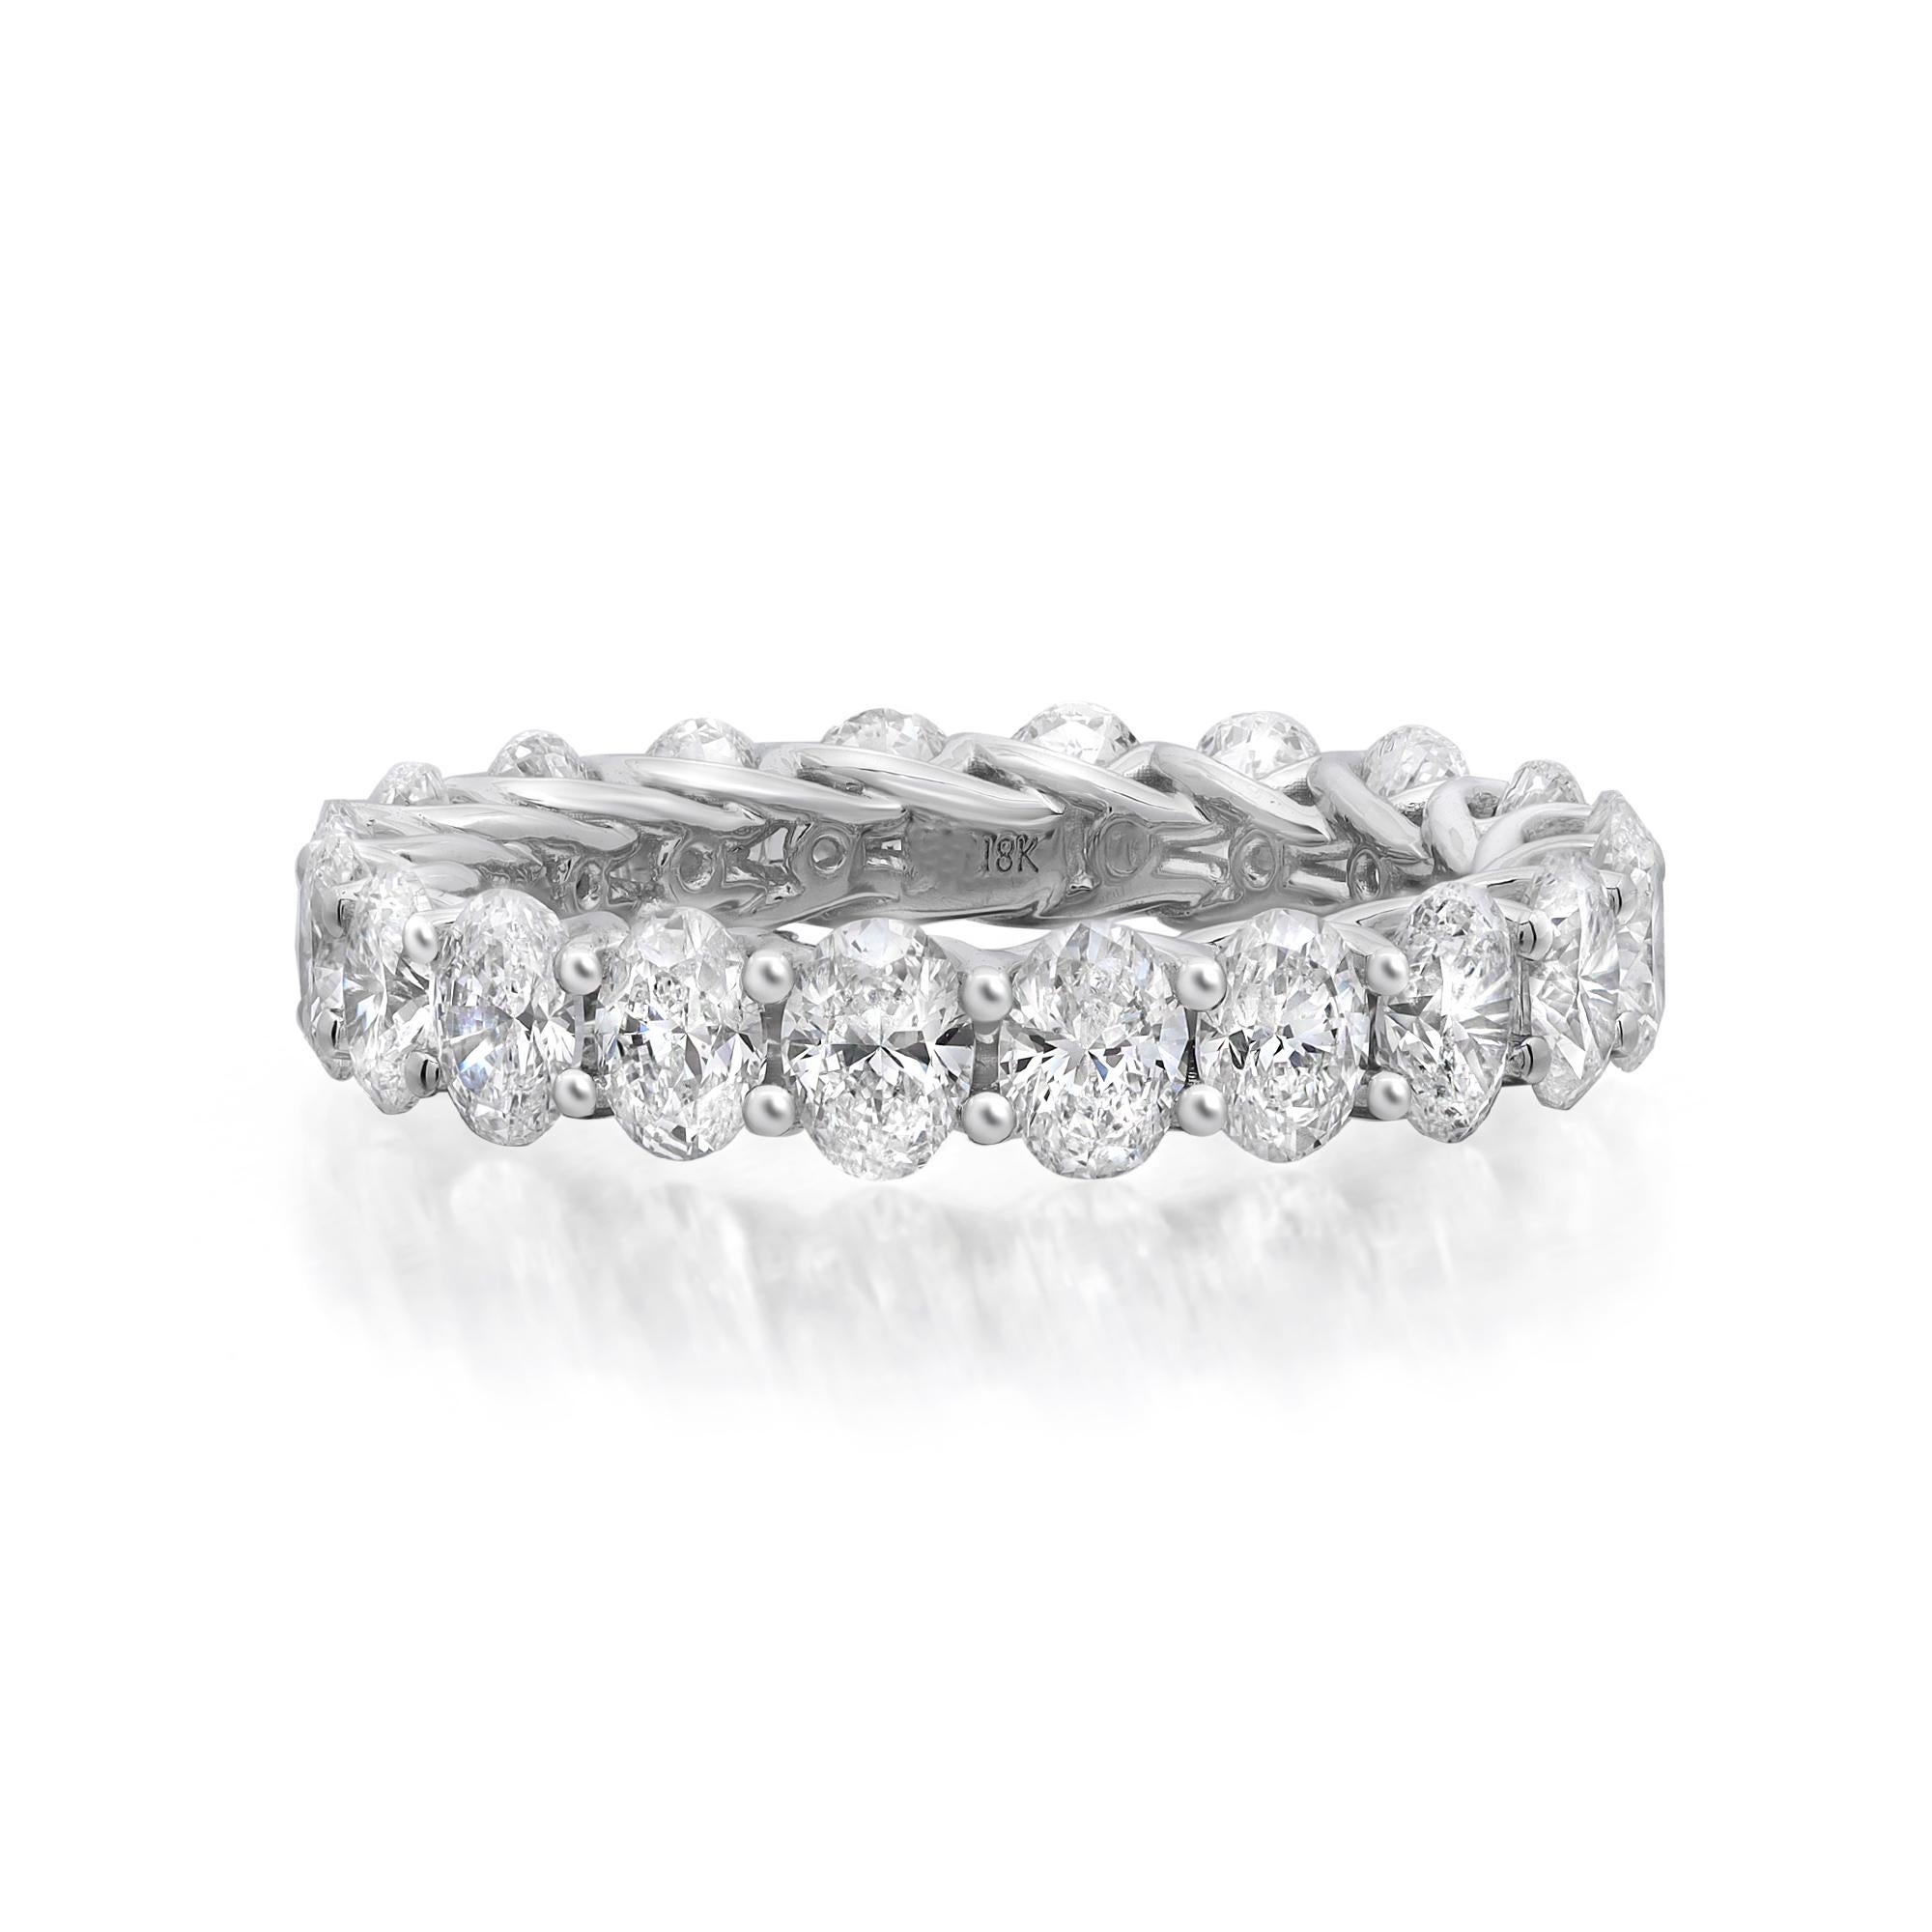 Modern 4.00Cttw Oval Cut Diamond Eternity Wedding Band Ring 18K White Gold For Sale